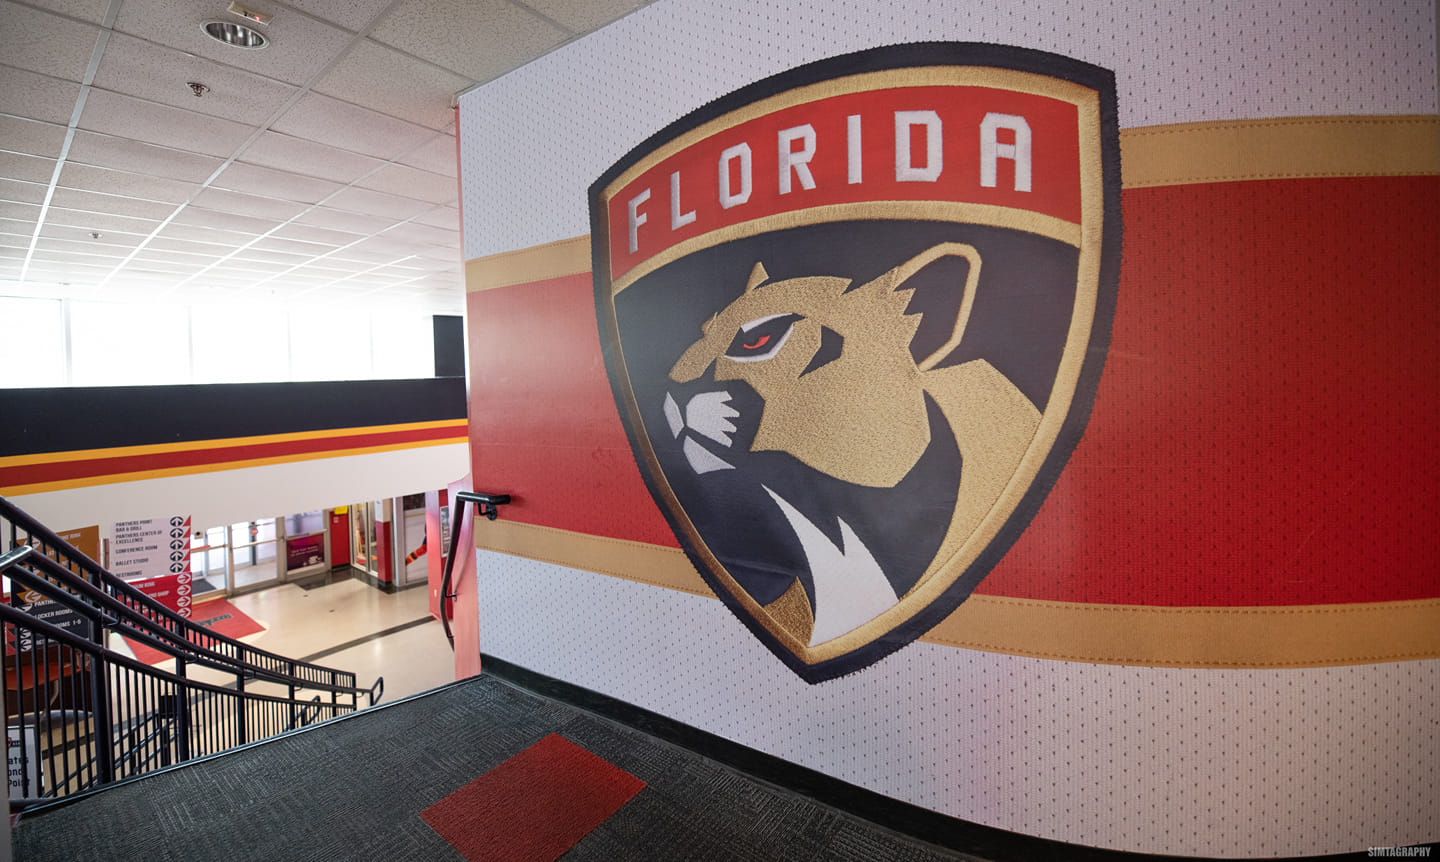 Florida Panthers logo on a wall leading towards the stairway of a building.